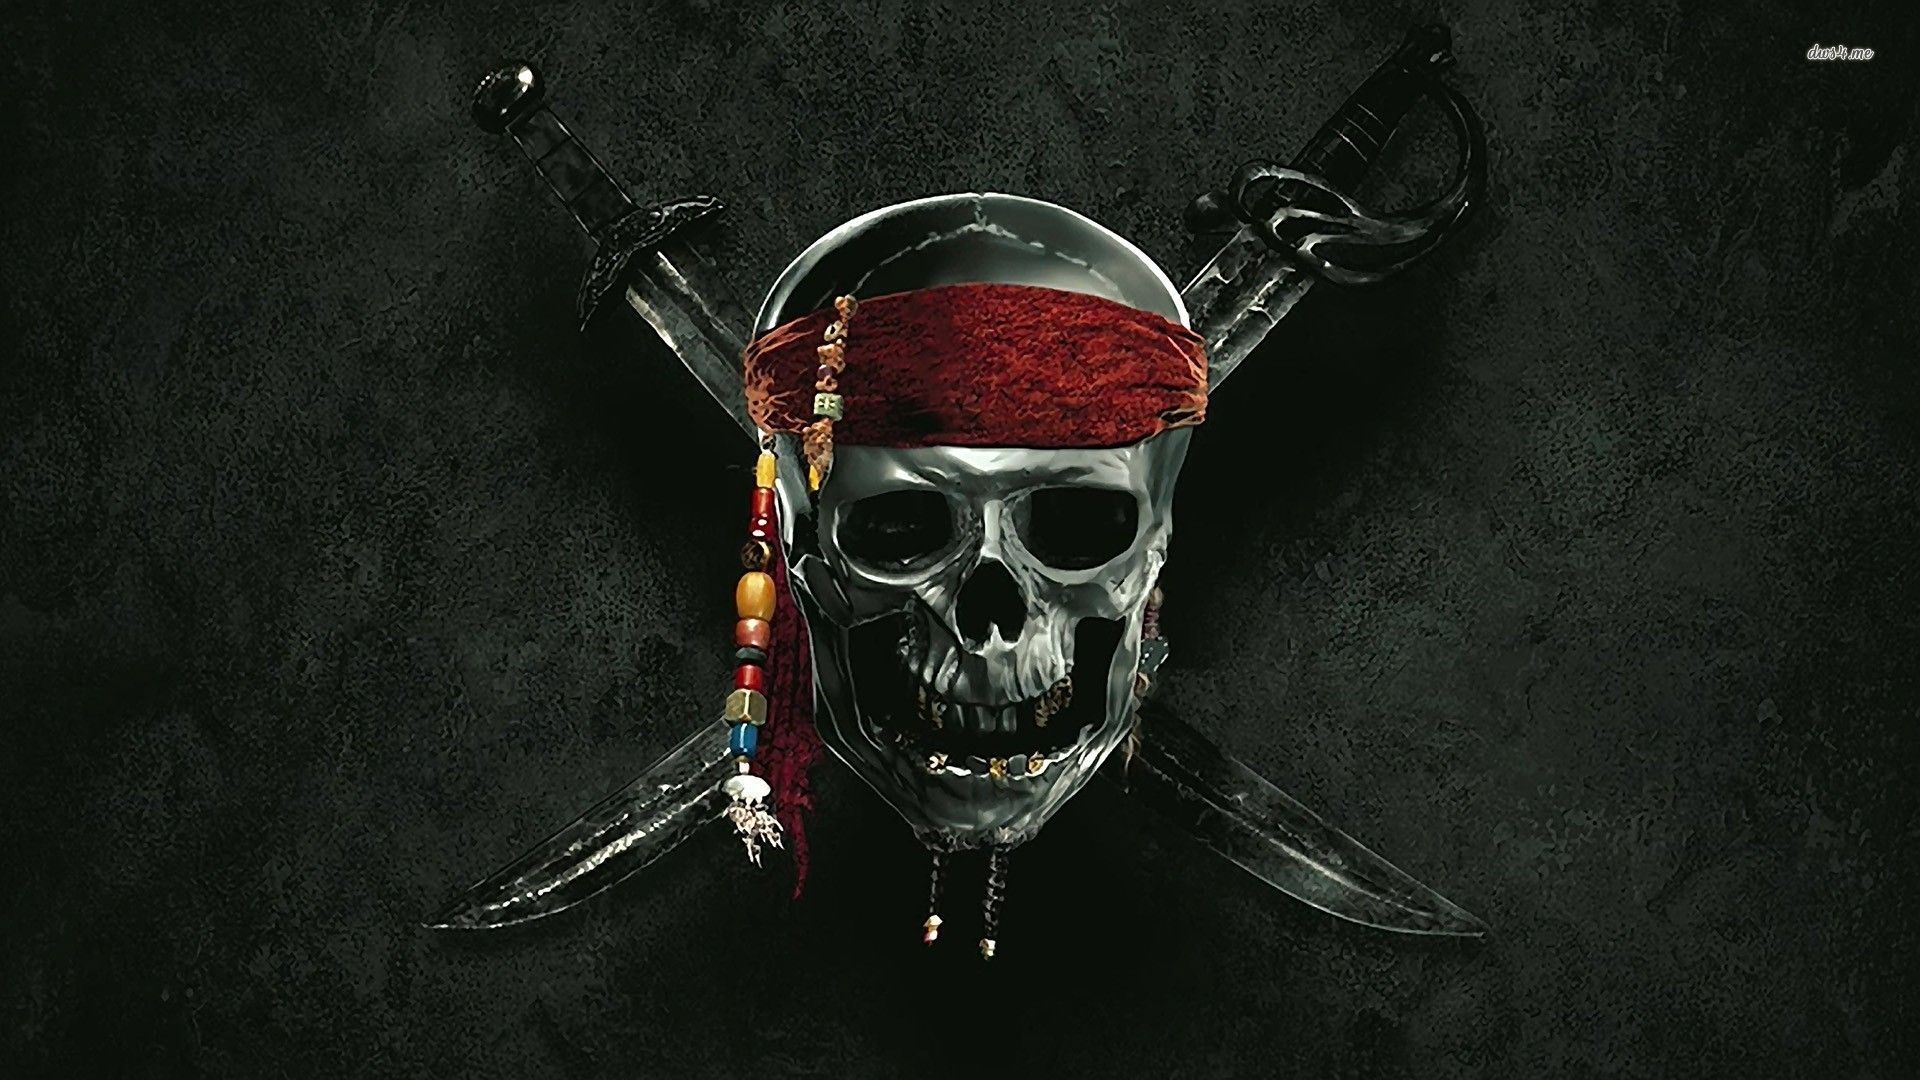 Pirates of the Caribbean wallpaper - Movie wallpapers - #20932